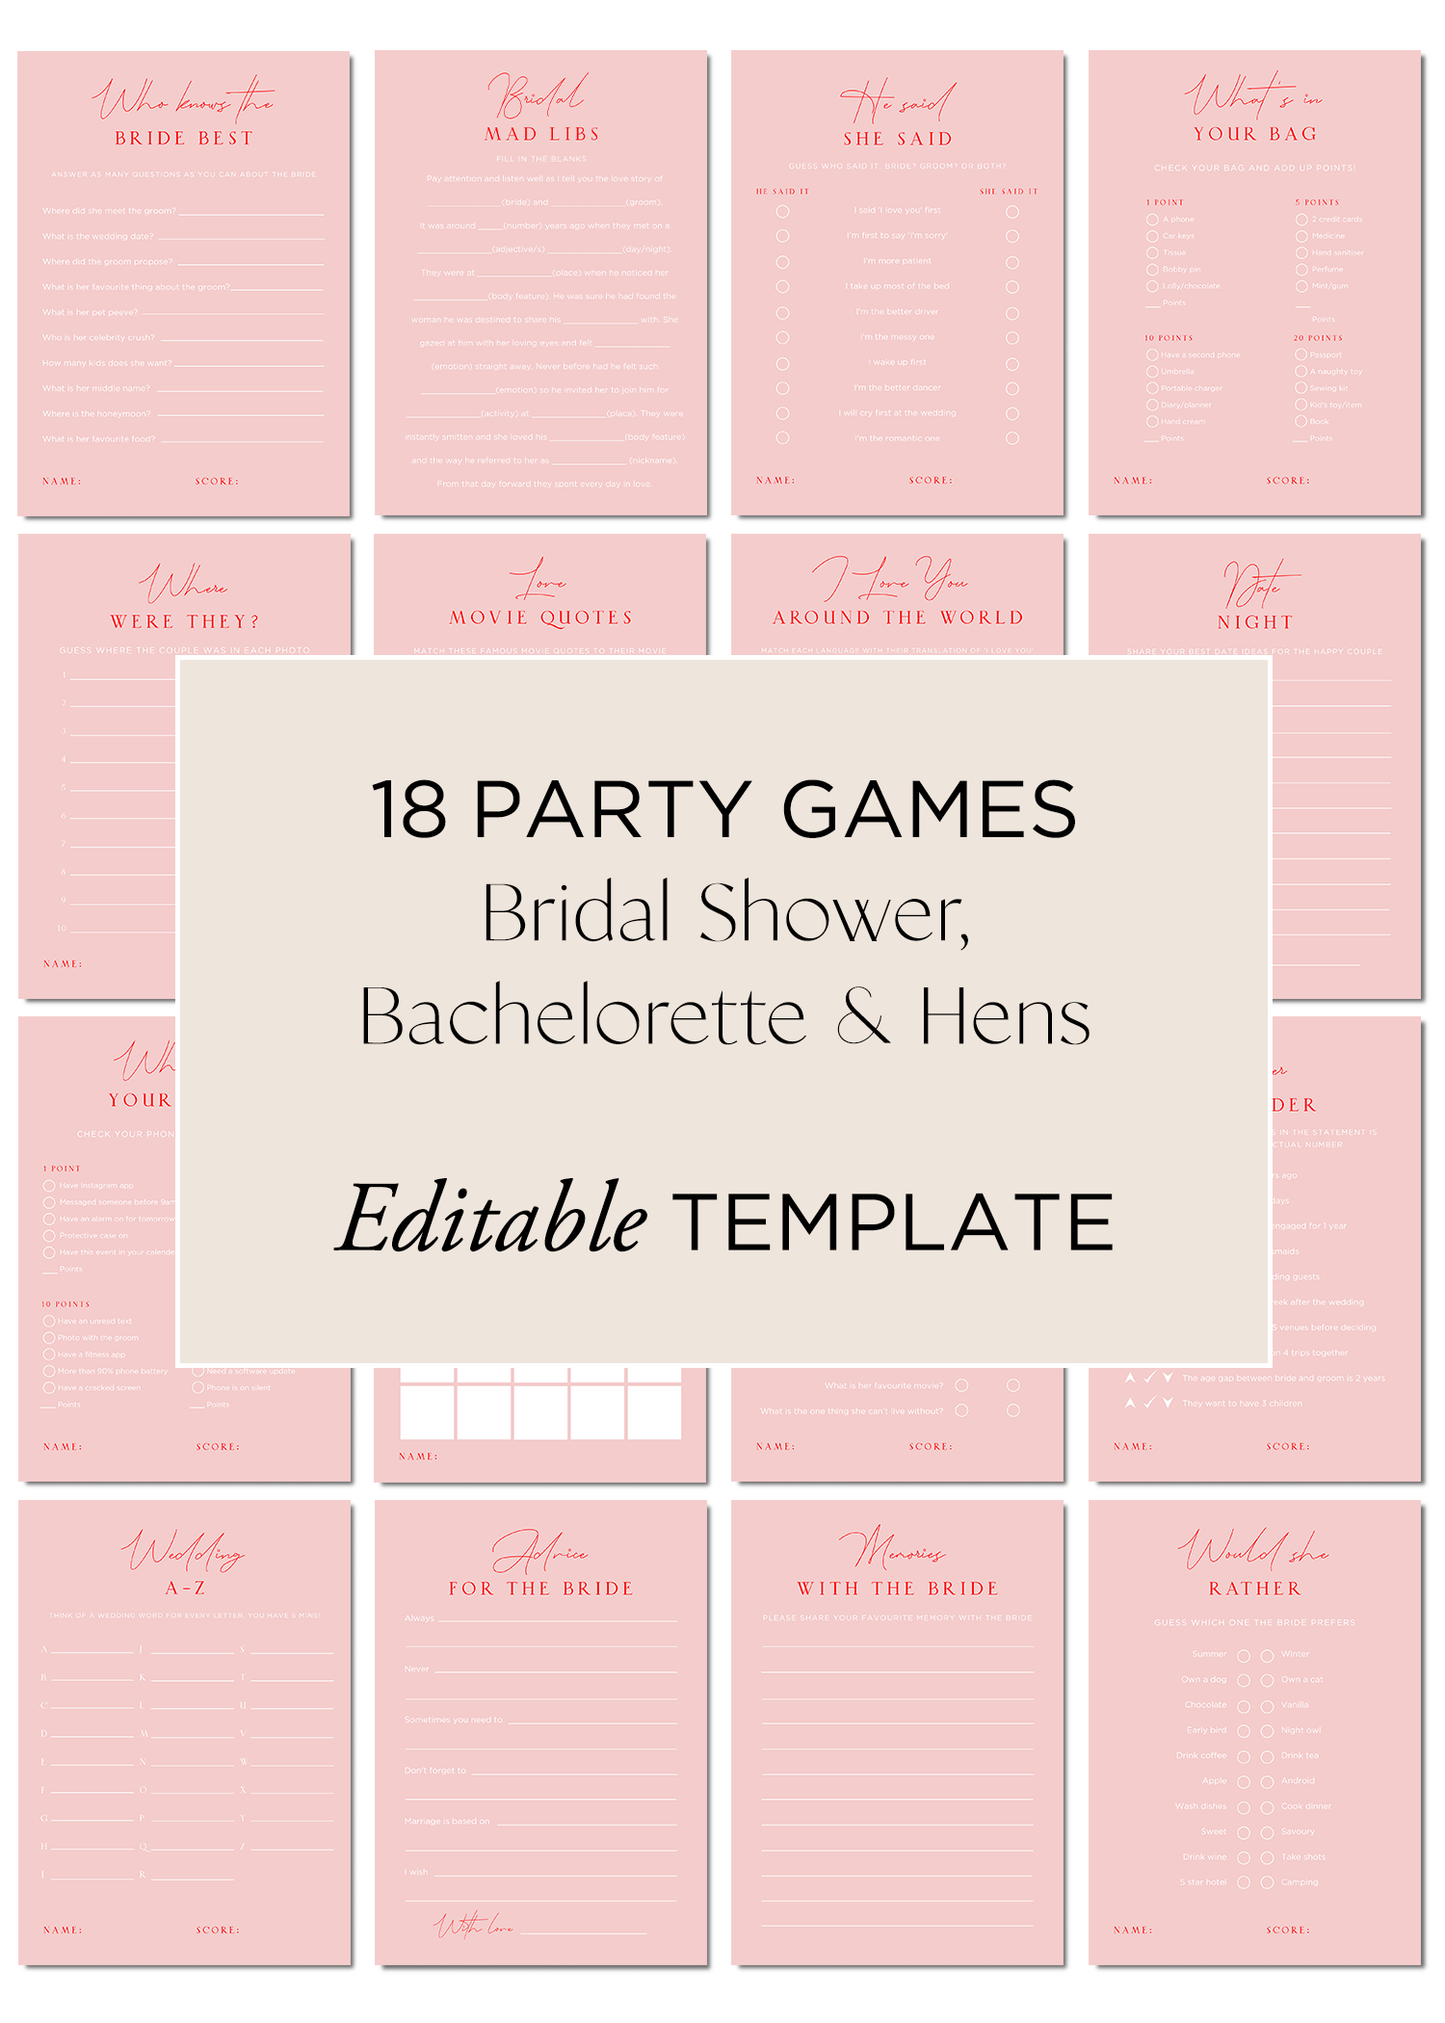 Hens Bachelorette Party Games Editable Template - Smitten - Vorfreude Stationery